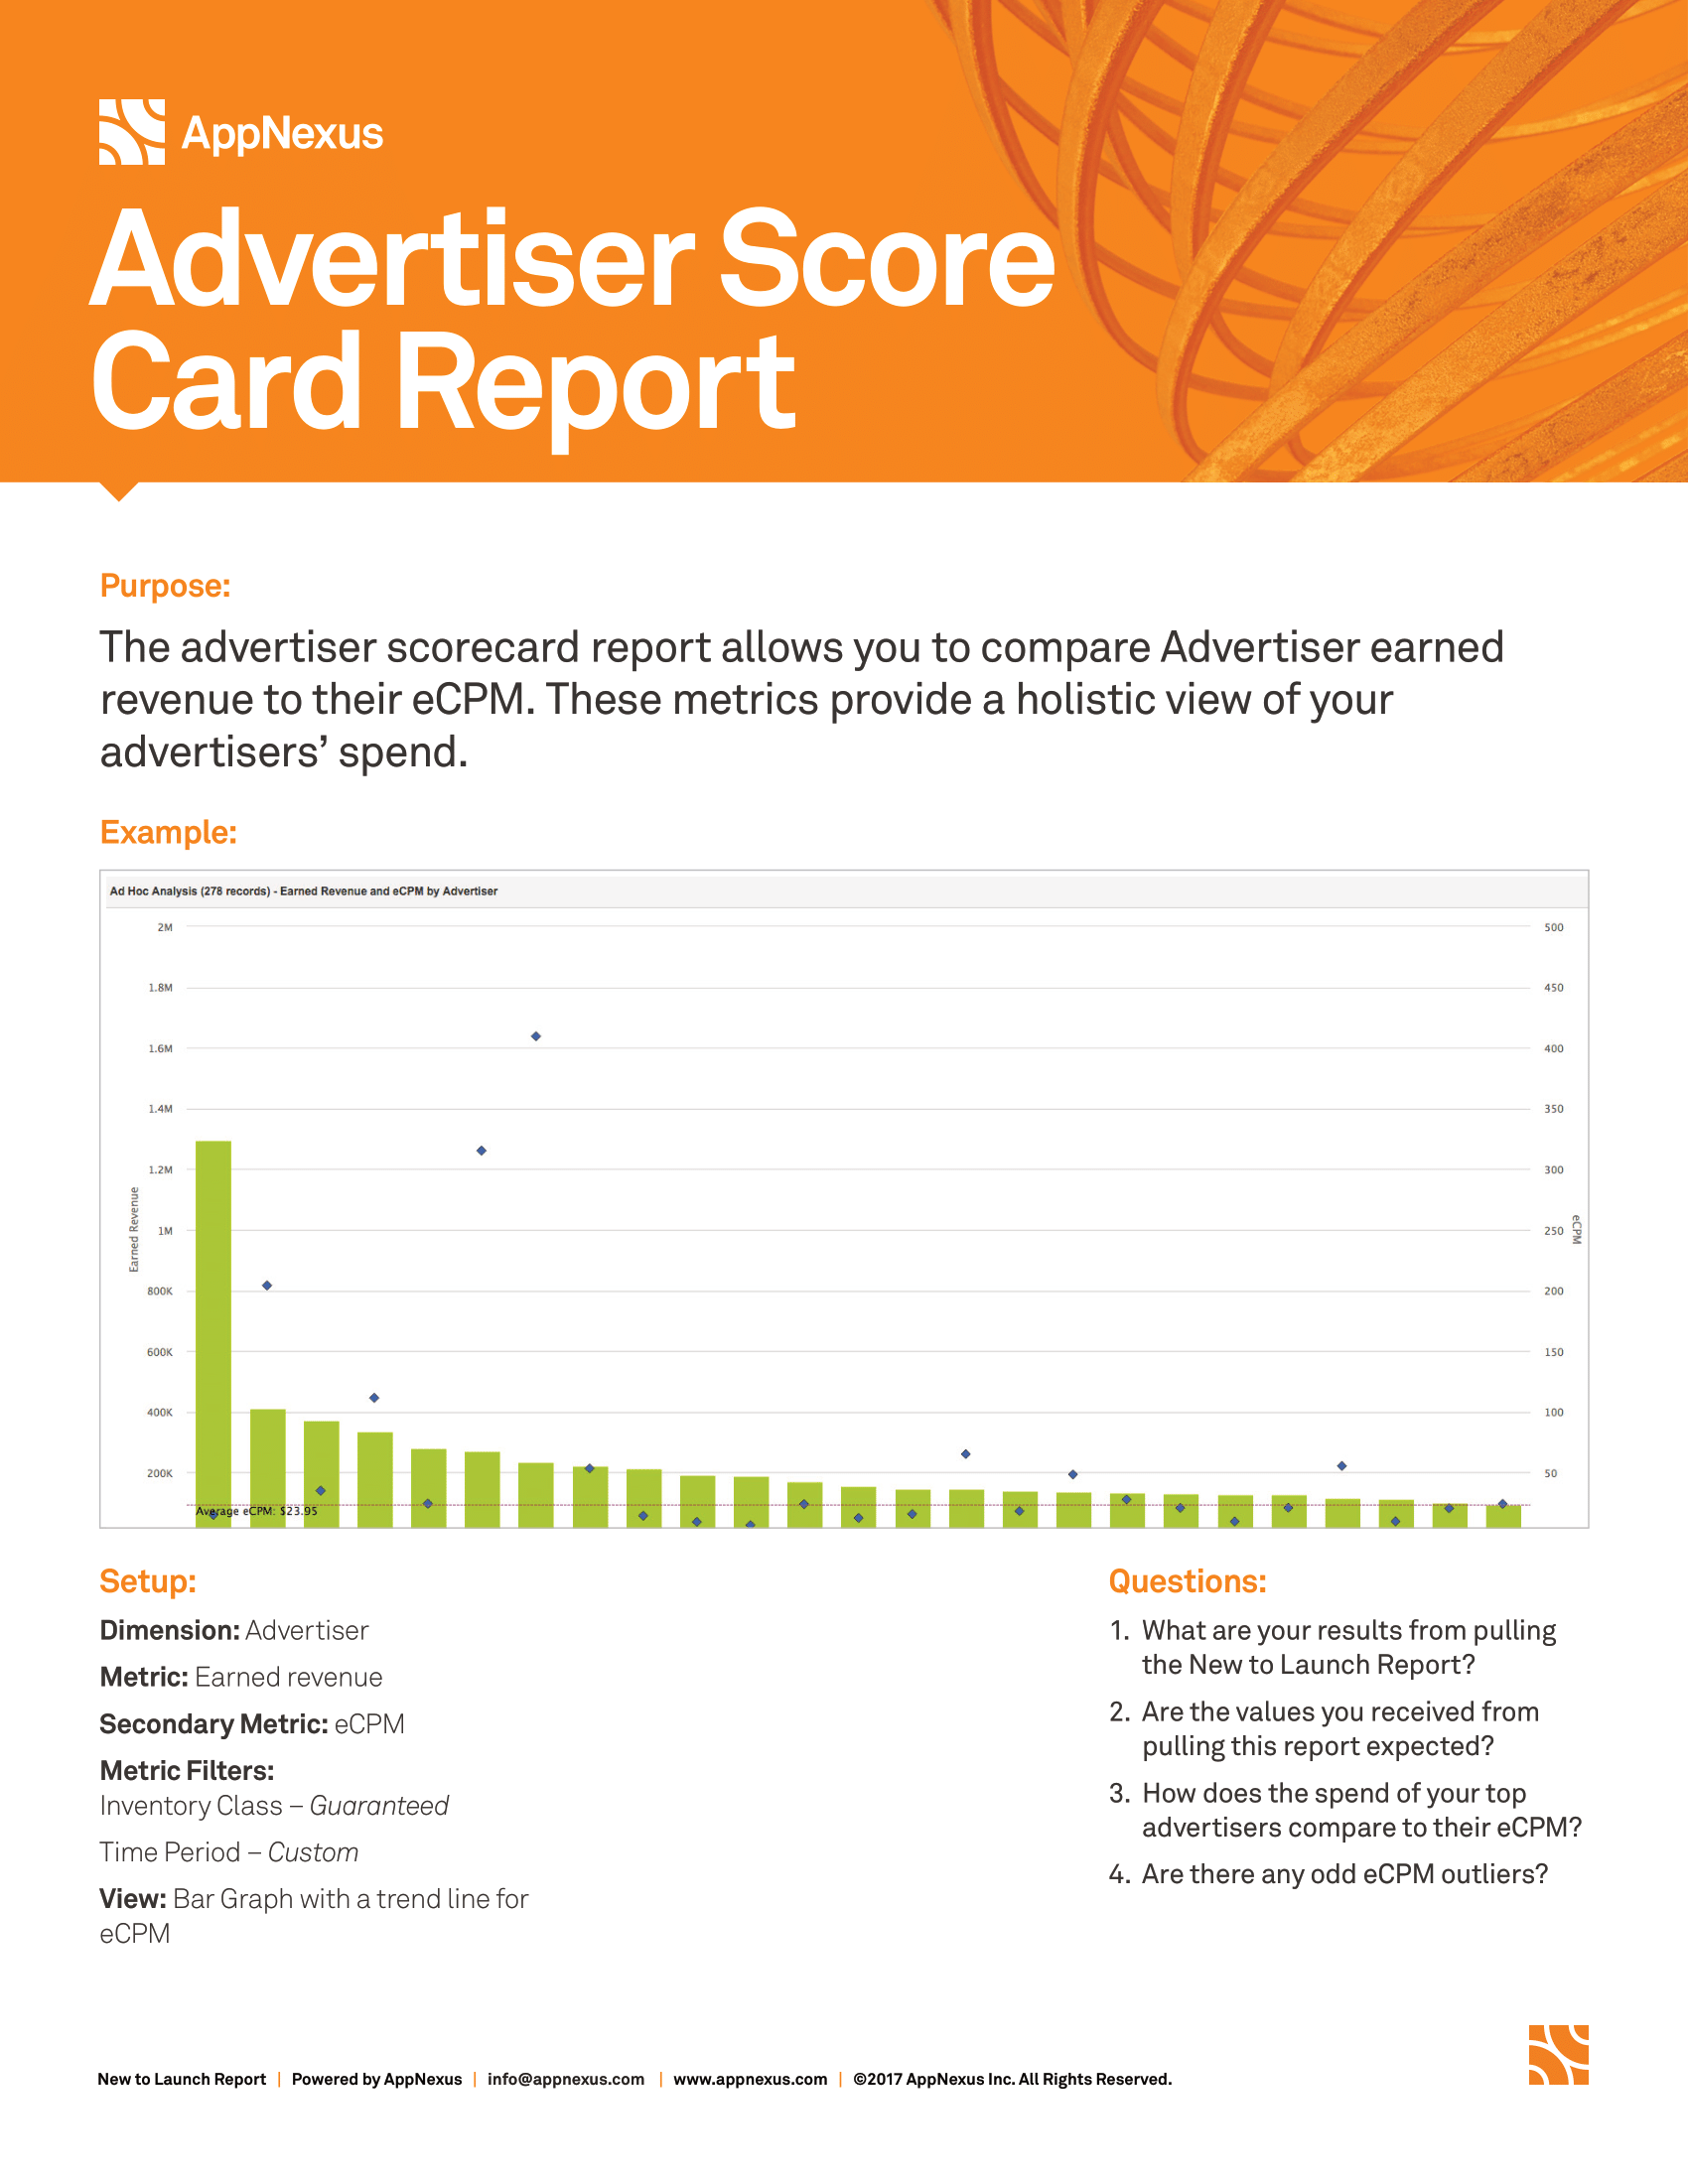 Screenshot that provides details about the Advertiser Scorecard report.